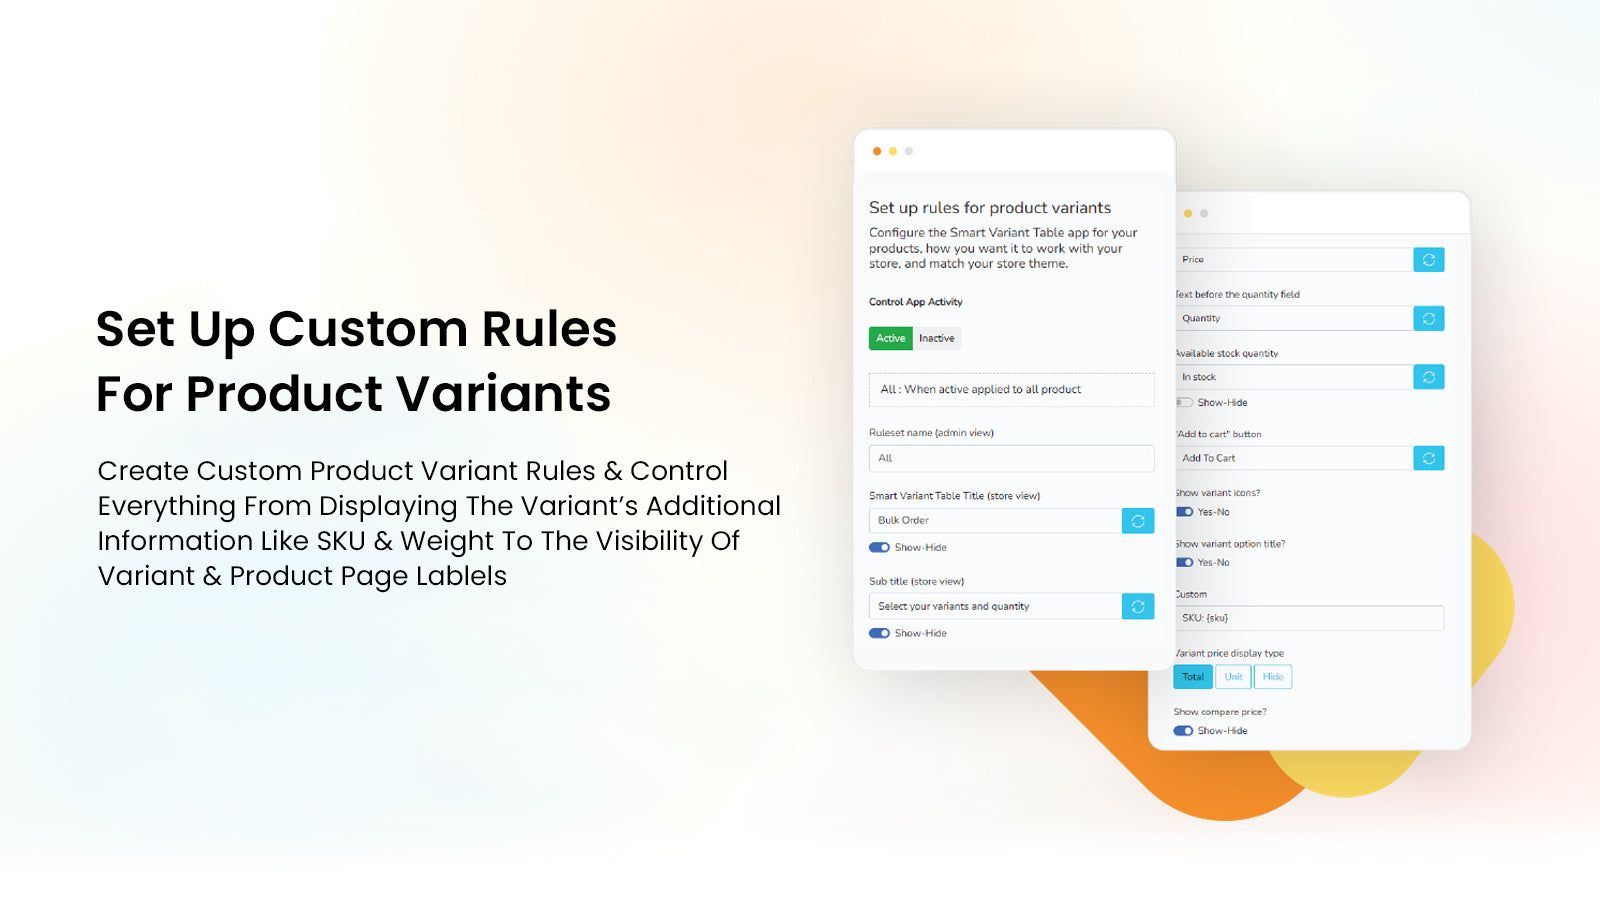 Set up custom rules for product variants